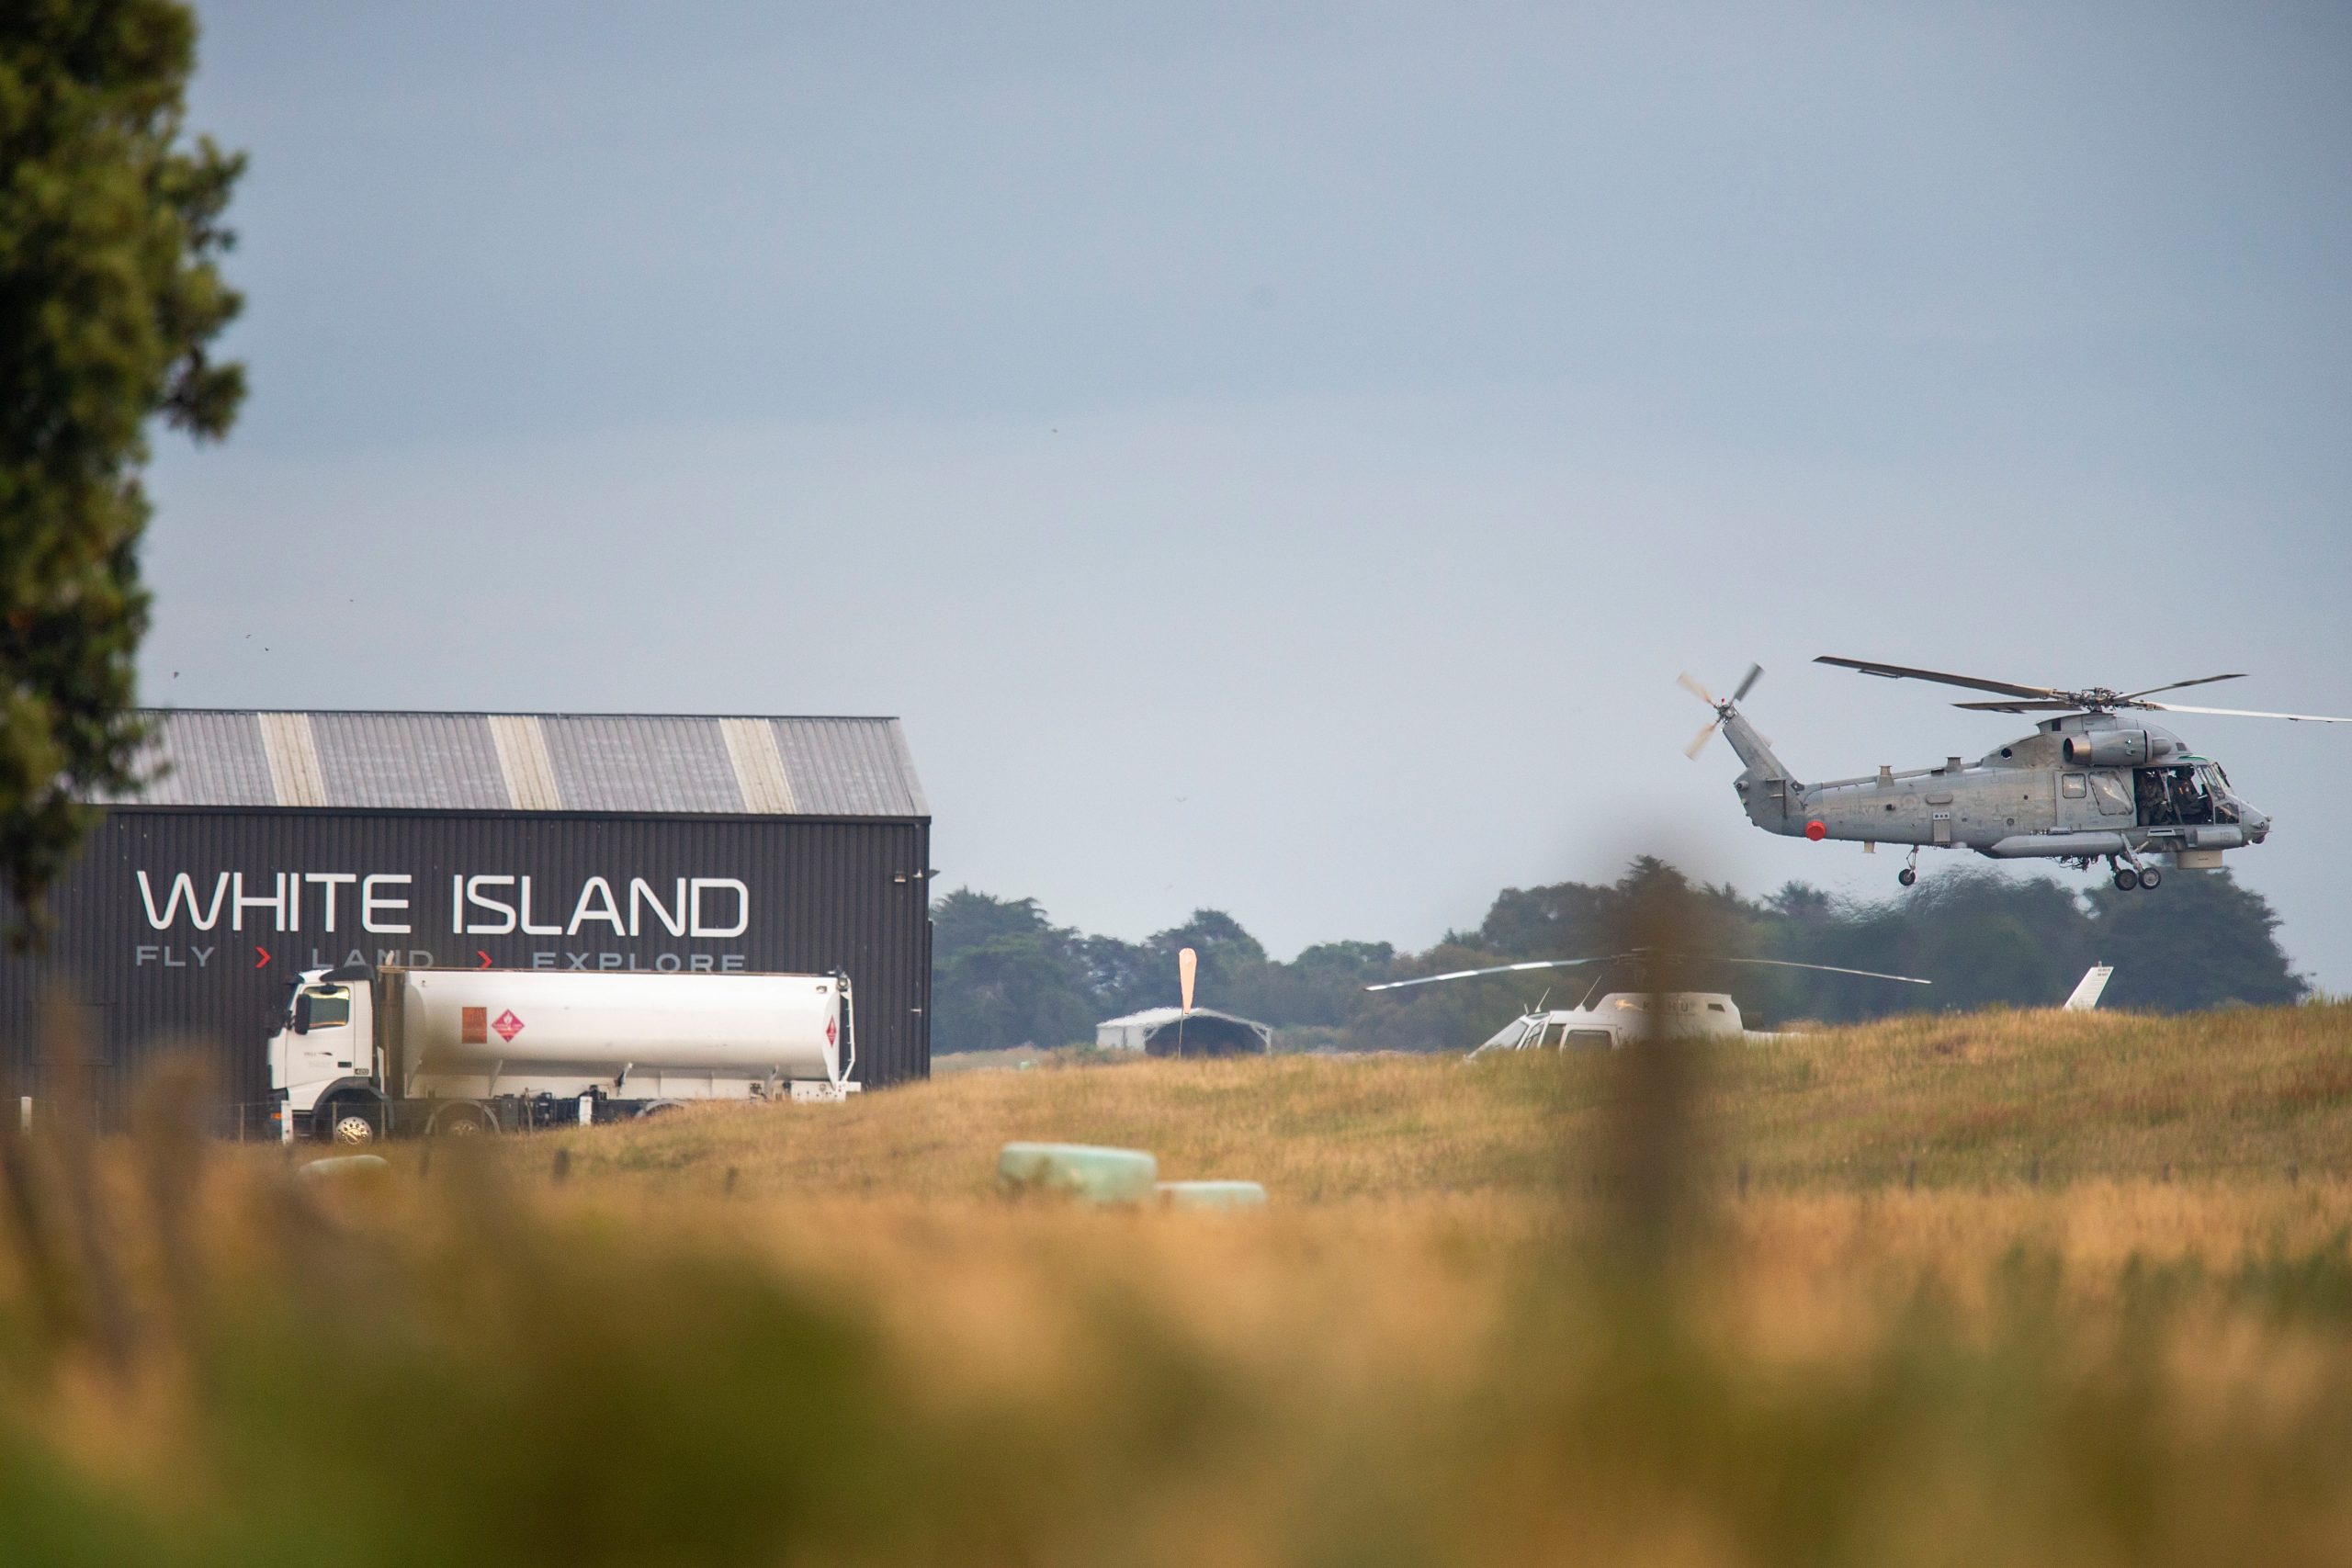 epa08066523 A military helicopter departs Whakatane airport during a recovery operation to retrieve the remaining bodies on White Island following its eruption in Whakatane, New Zealand, 13 December 2019.  EPA/DAVID ROWLAND AUSTRALIA AND NEW ZEALAND OUT